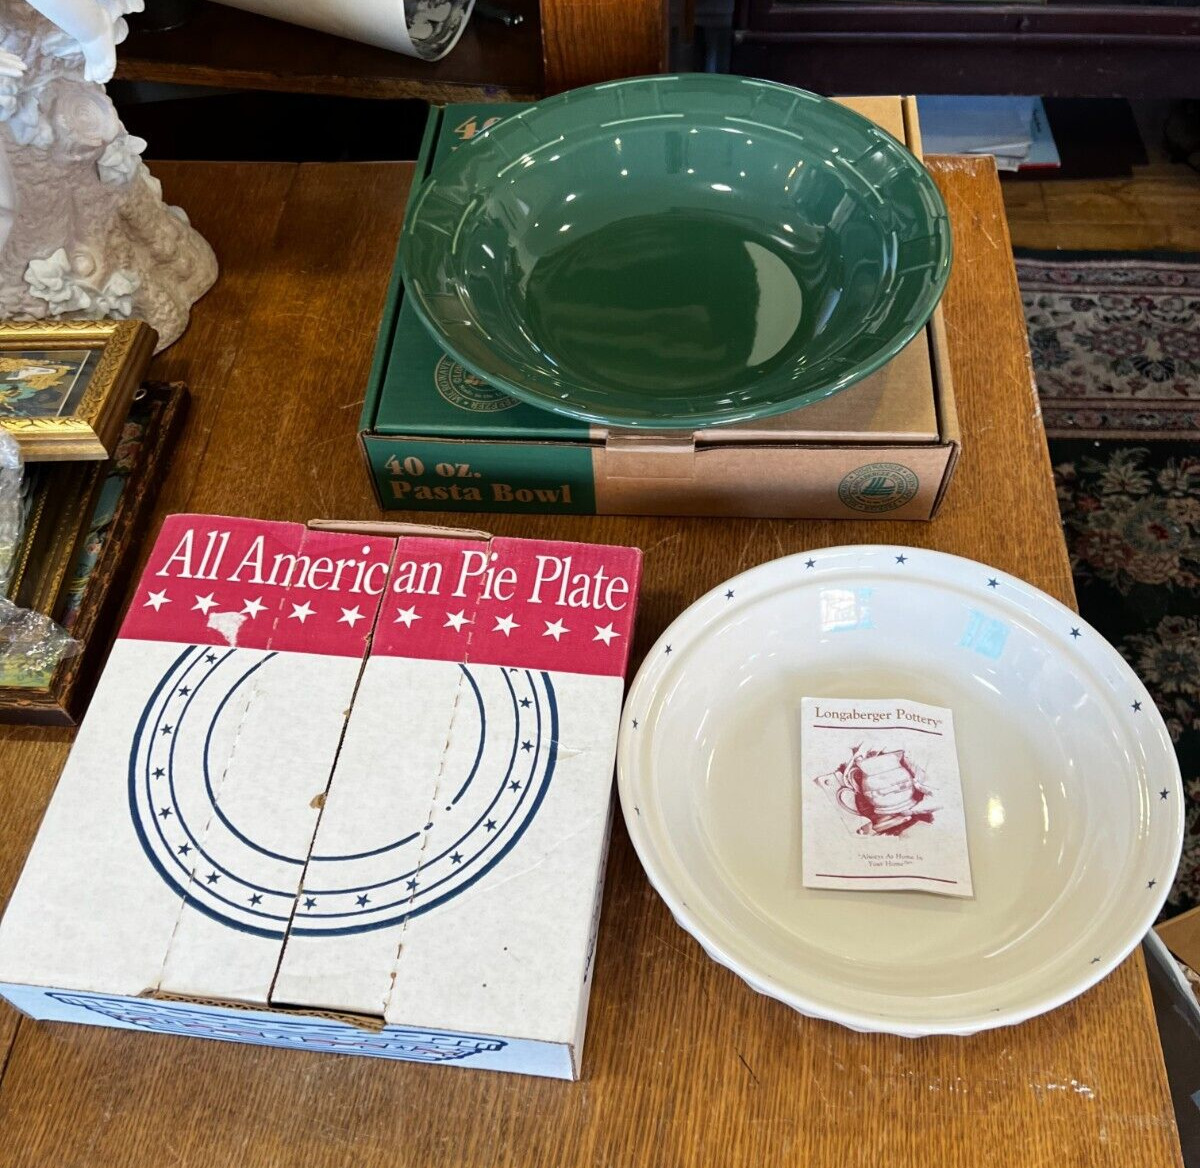 Lot of 2 Longaberger Pottery Pieces _ All American Pie Plate & 40oz. Pasta Bowl